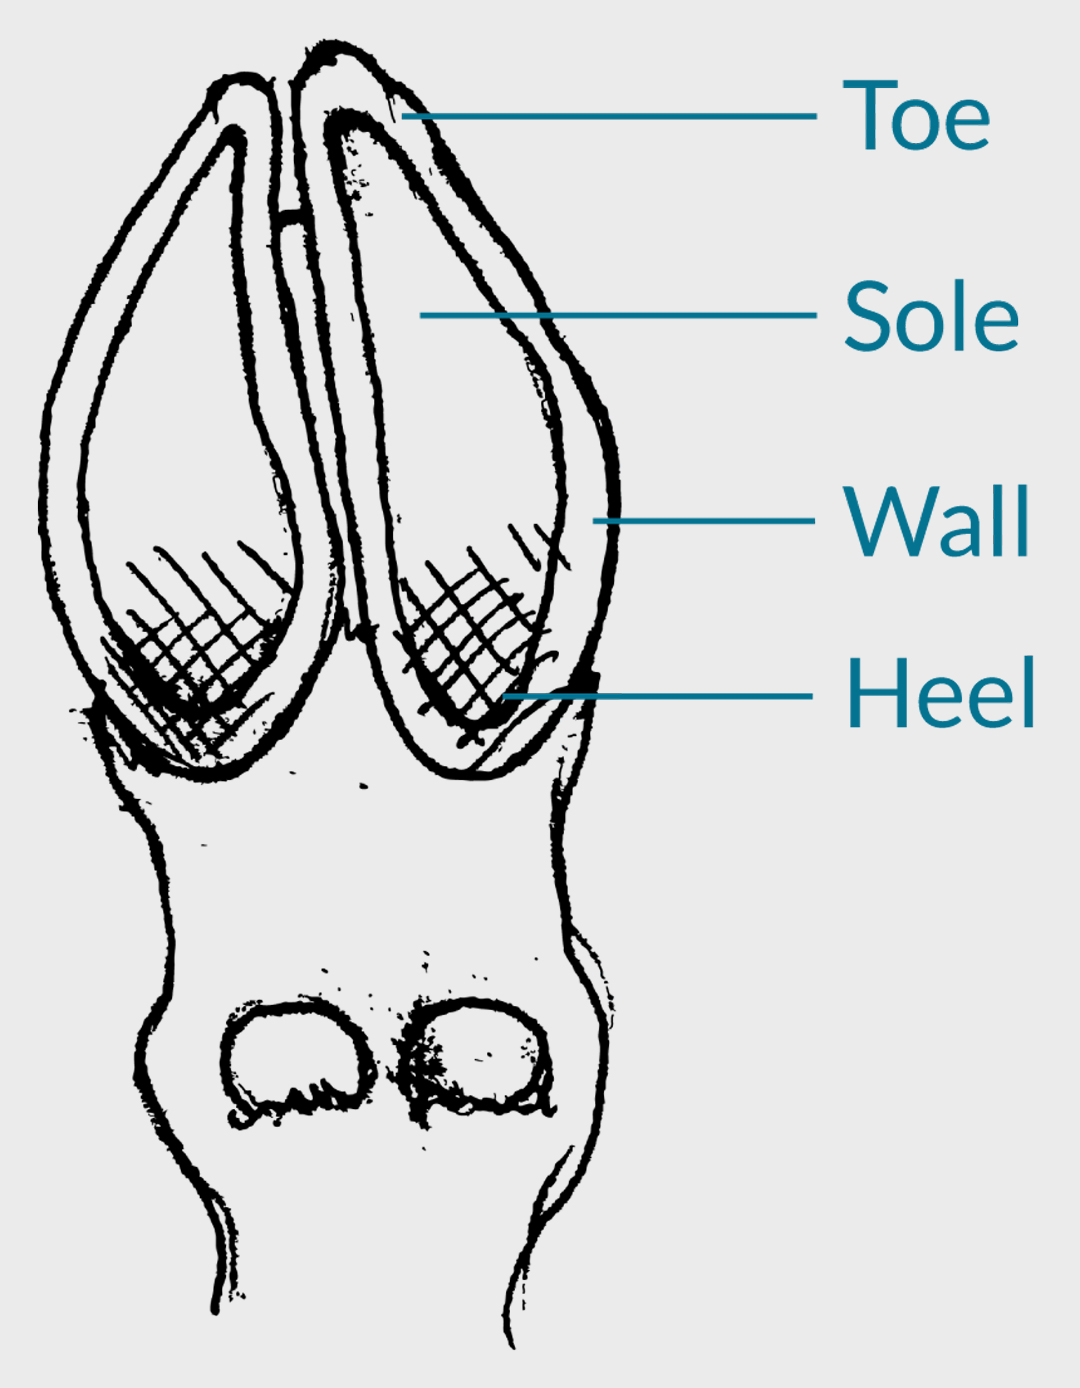 Diagram showing the underside of a properly trimmed goat hoof with heel wall, sole, and toe.